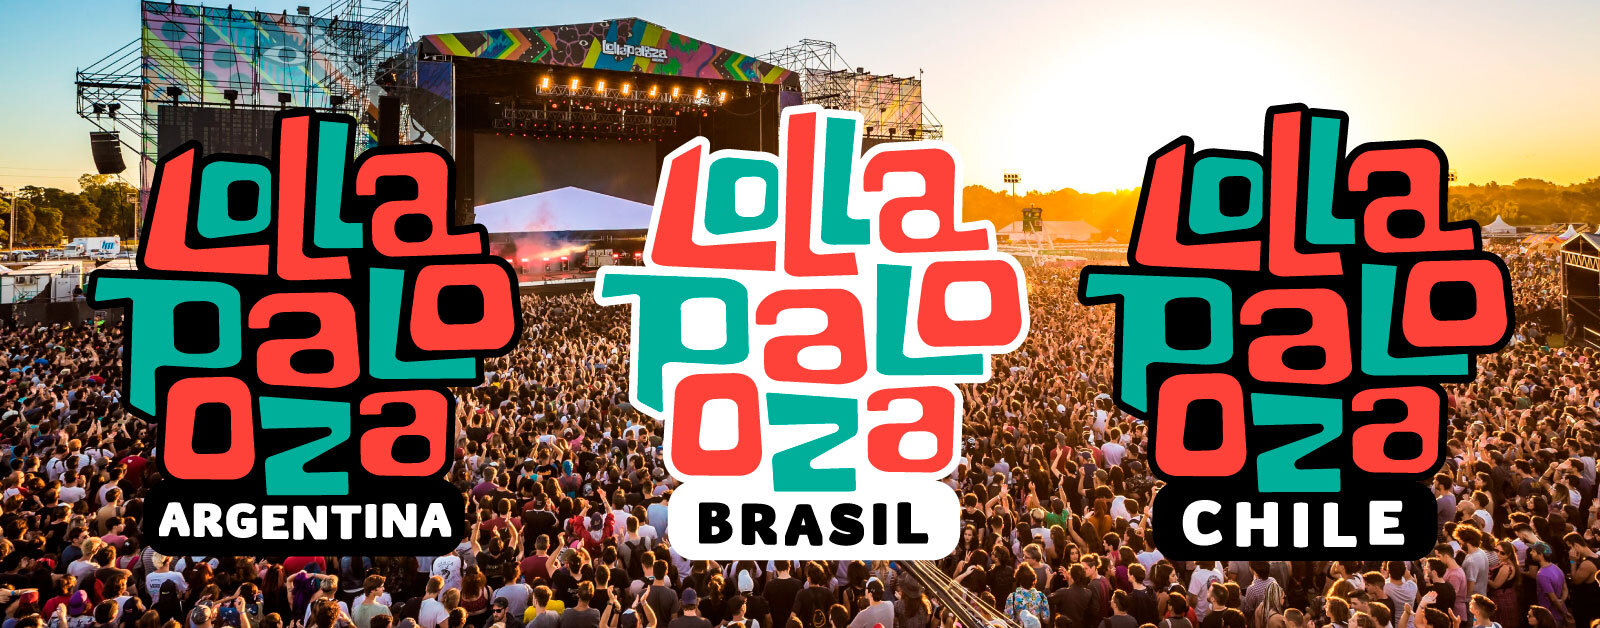 Blink-182, SZA, Paramore (Brazil Only), Feid (Chile/Argentina Only), Sam  Smith, Arcade Fire, And Limp Bizkit To Headline Lollapalooza Chile,  Lollapalooza Argentina And Lollapalooza Brasil 2024 - Live Nation  Entertainment